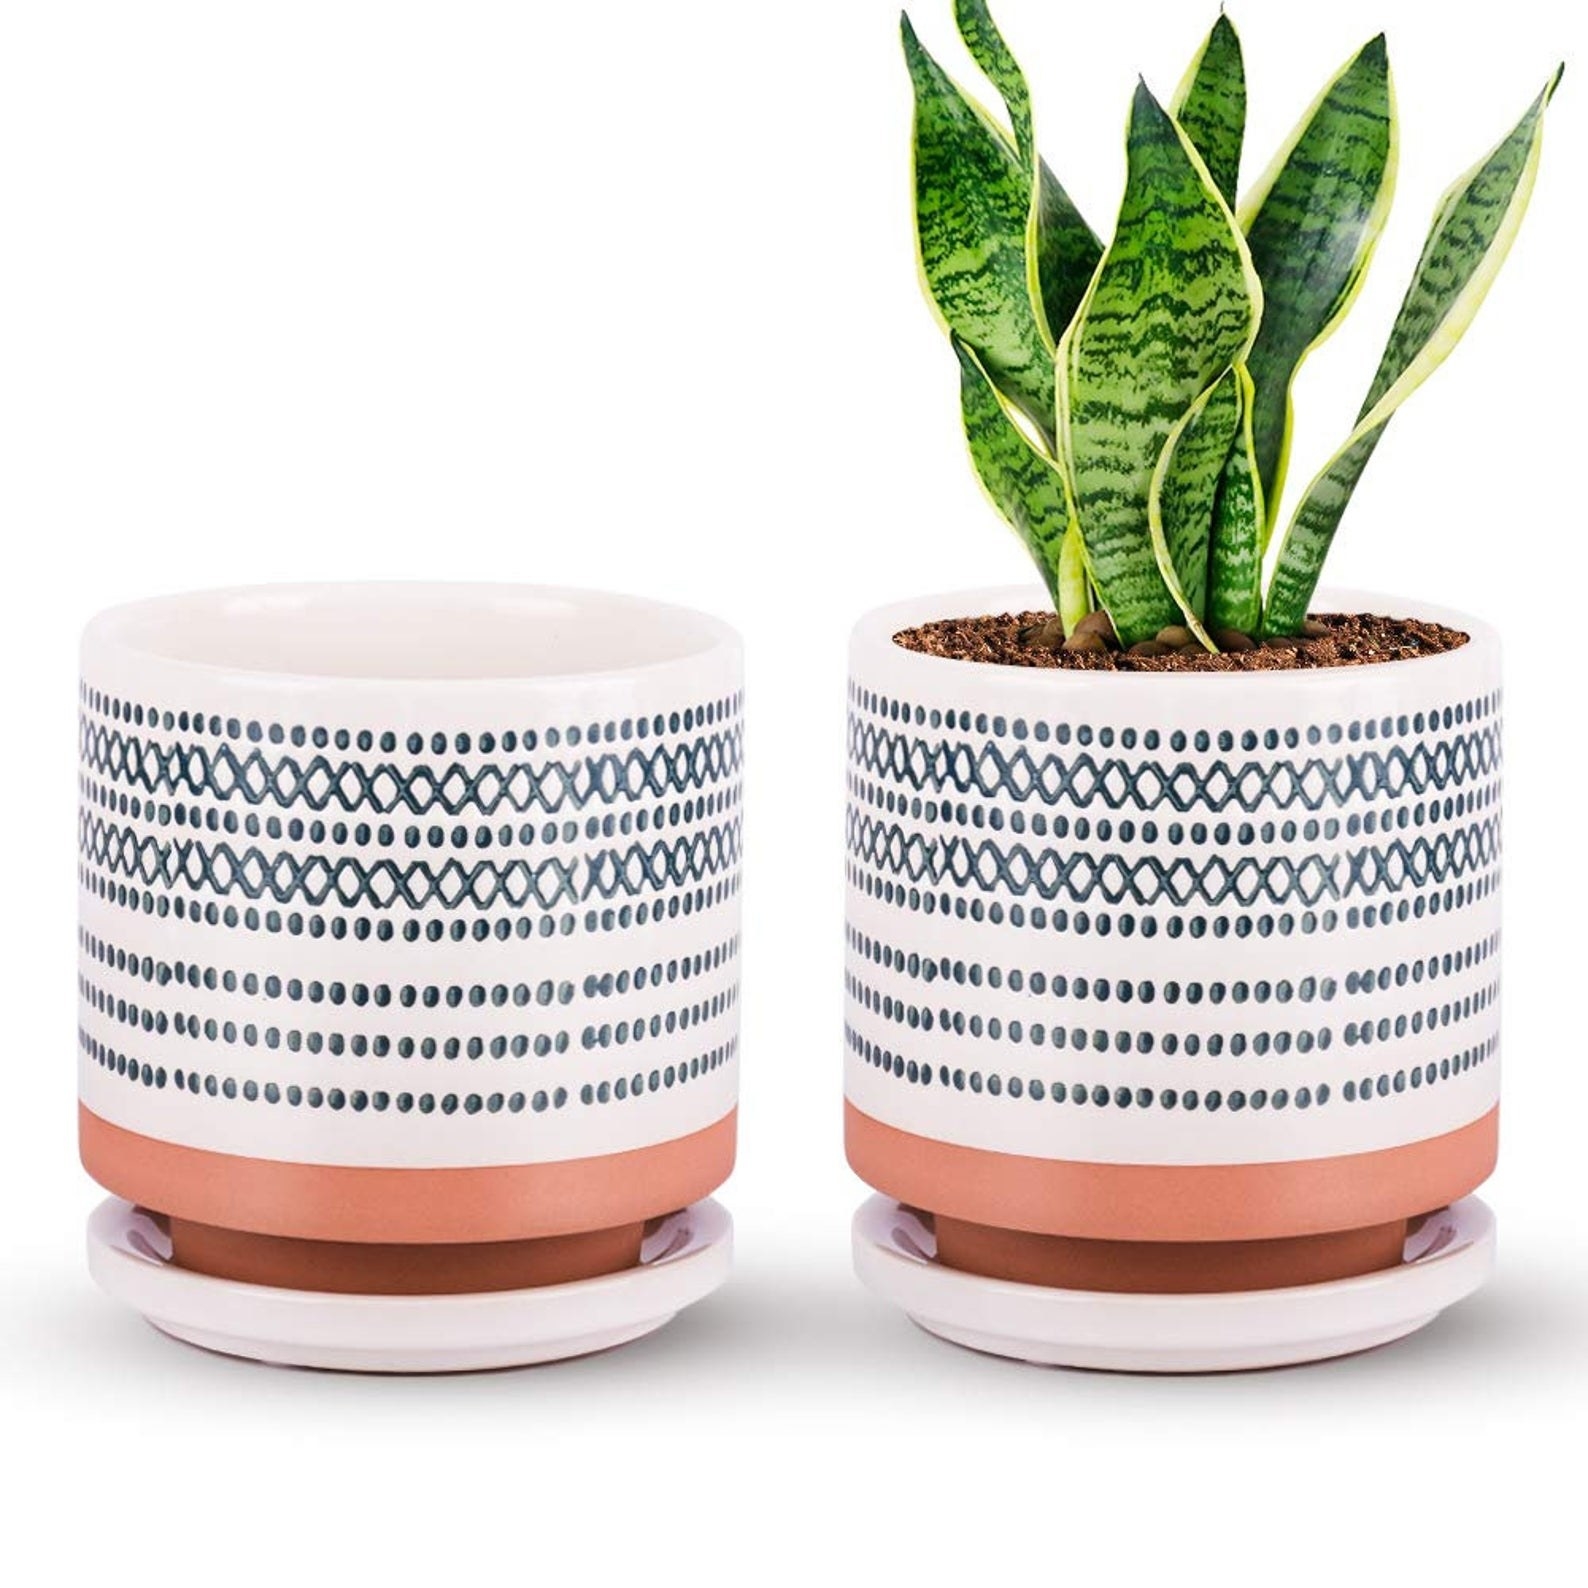 Two white pots with dark blue designs on them